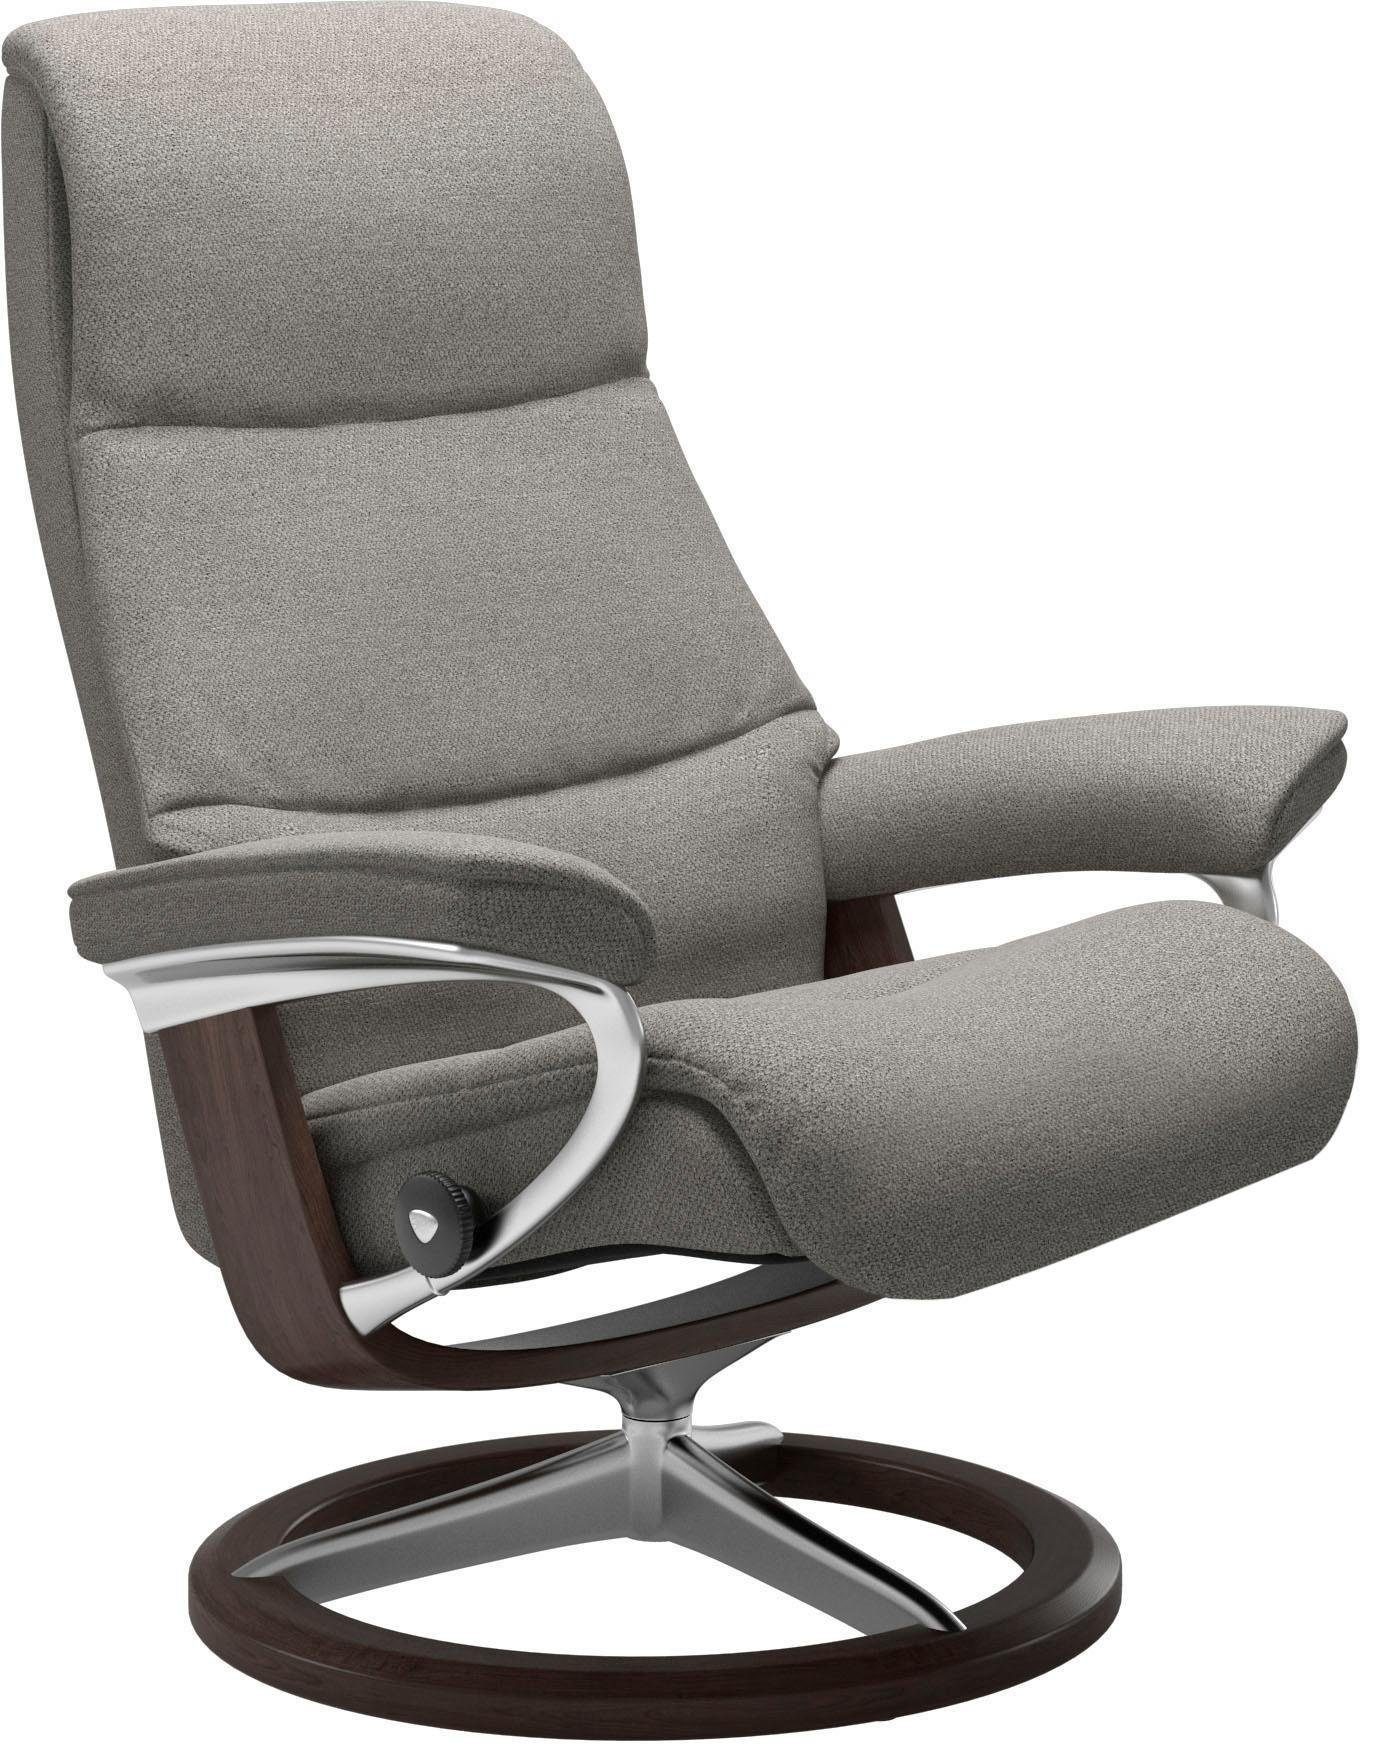 mit View, Stressless® Größe Signature S,Gestell Base, Relaxsessel Wenge